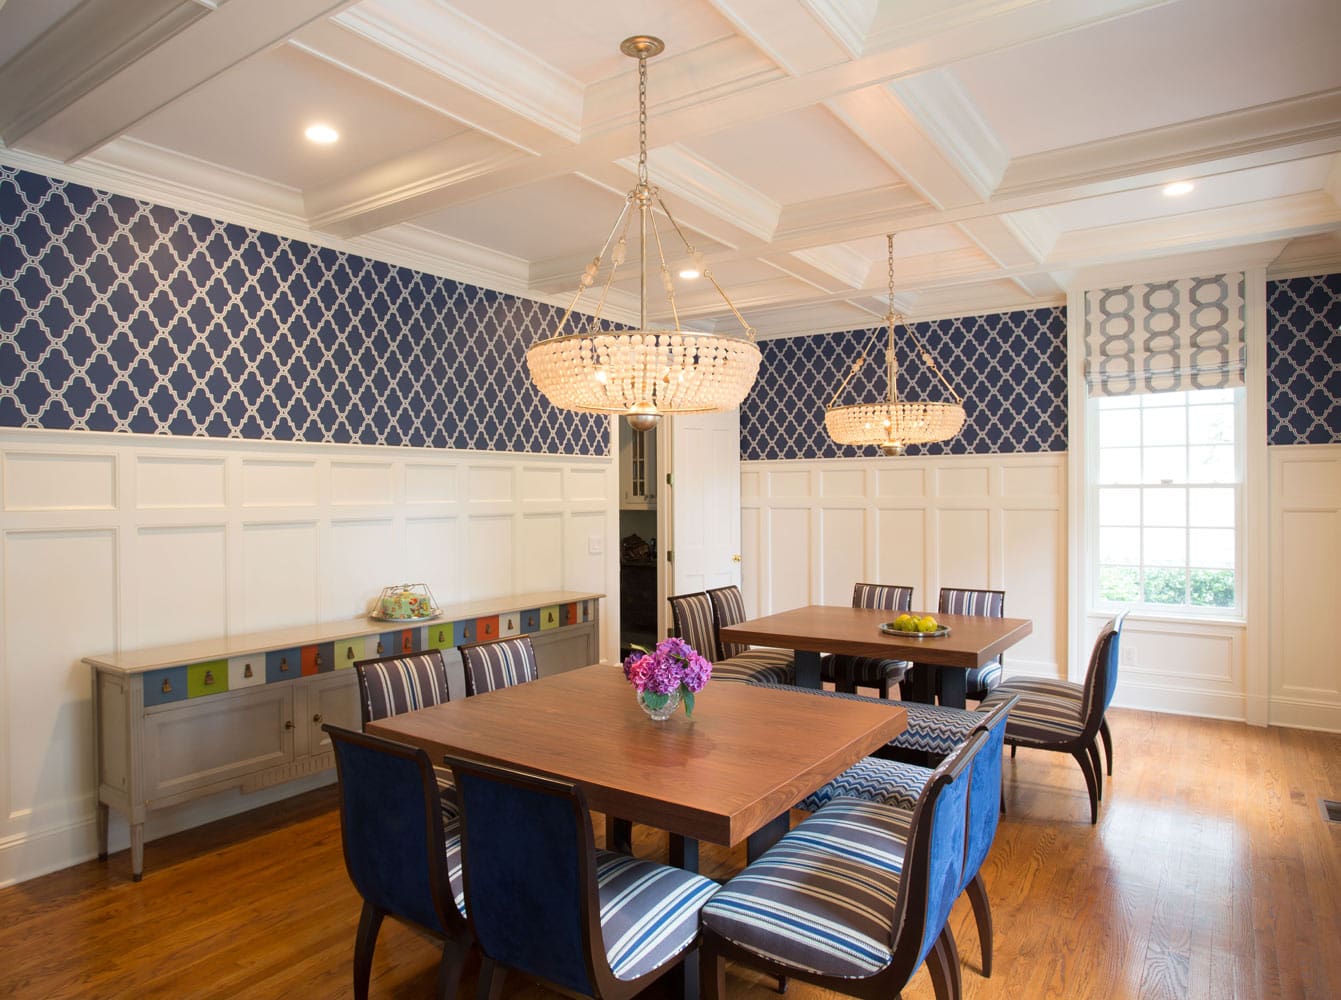 New York grand colonial home dining room design by Annette Jaffe Interiors